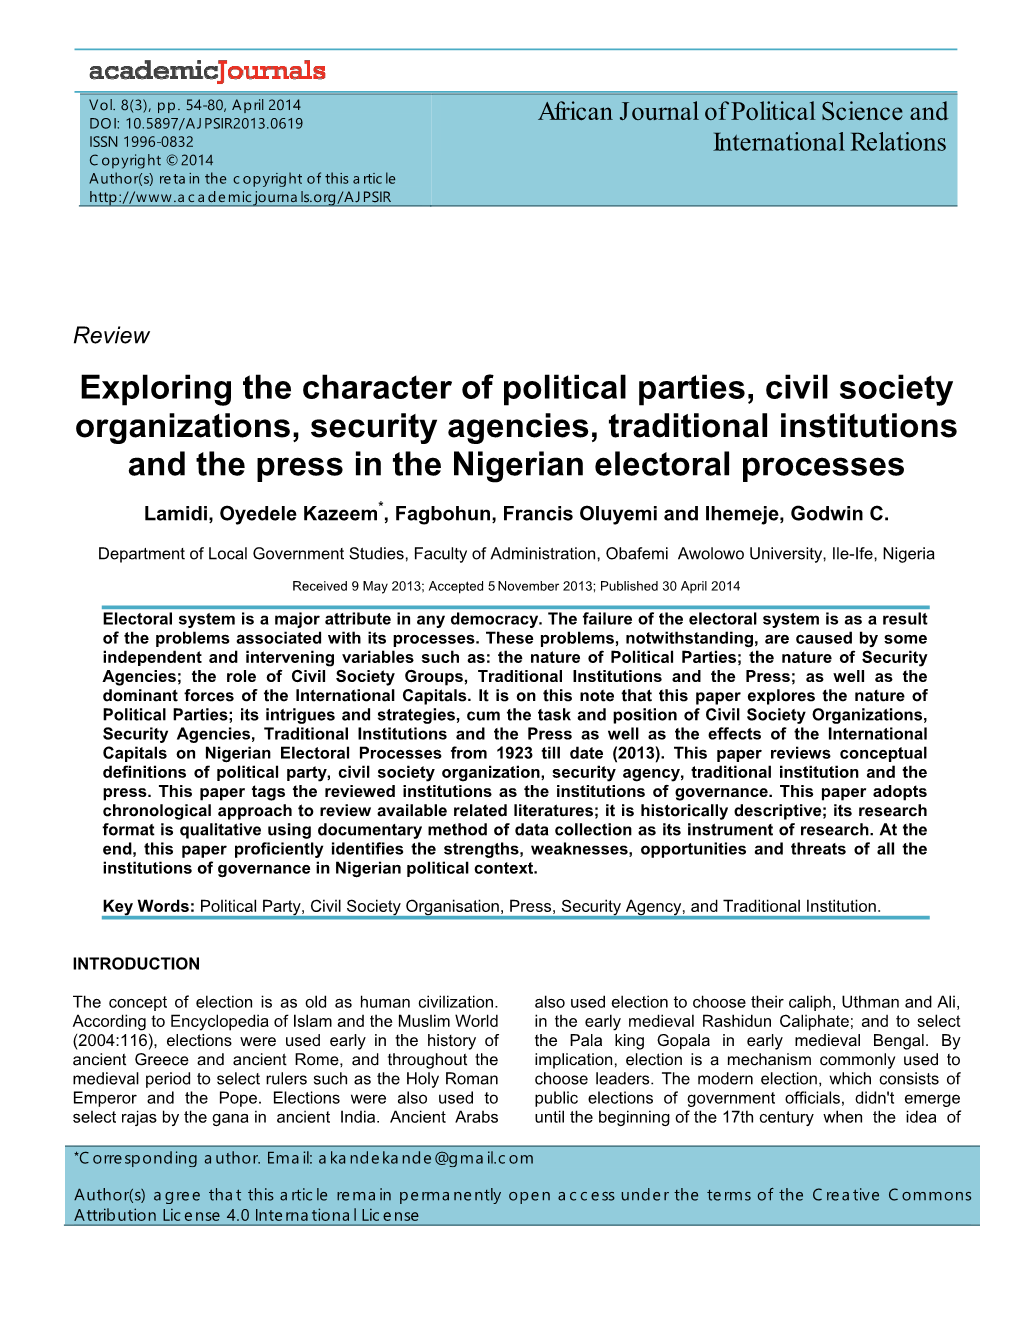 Exploring the Character of Political Parties, Civil Society Organizations, Security Agencies, Traditional Institutions and the P